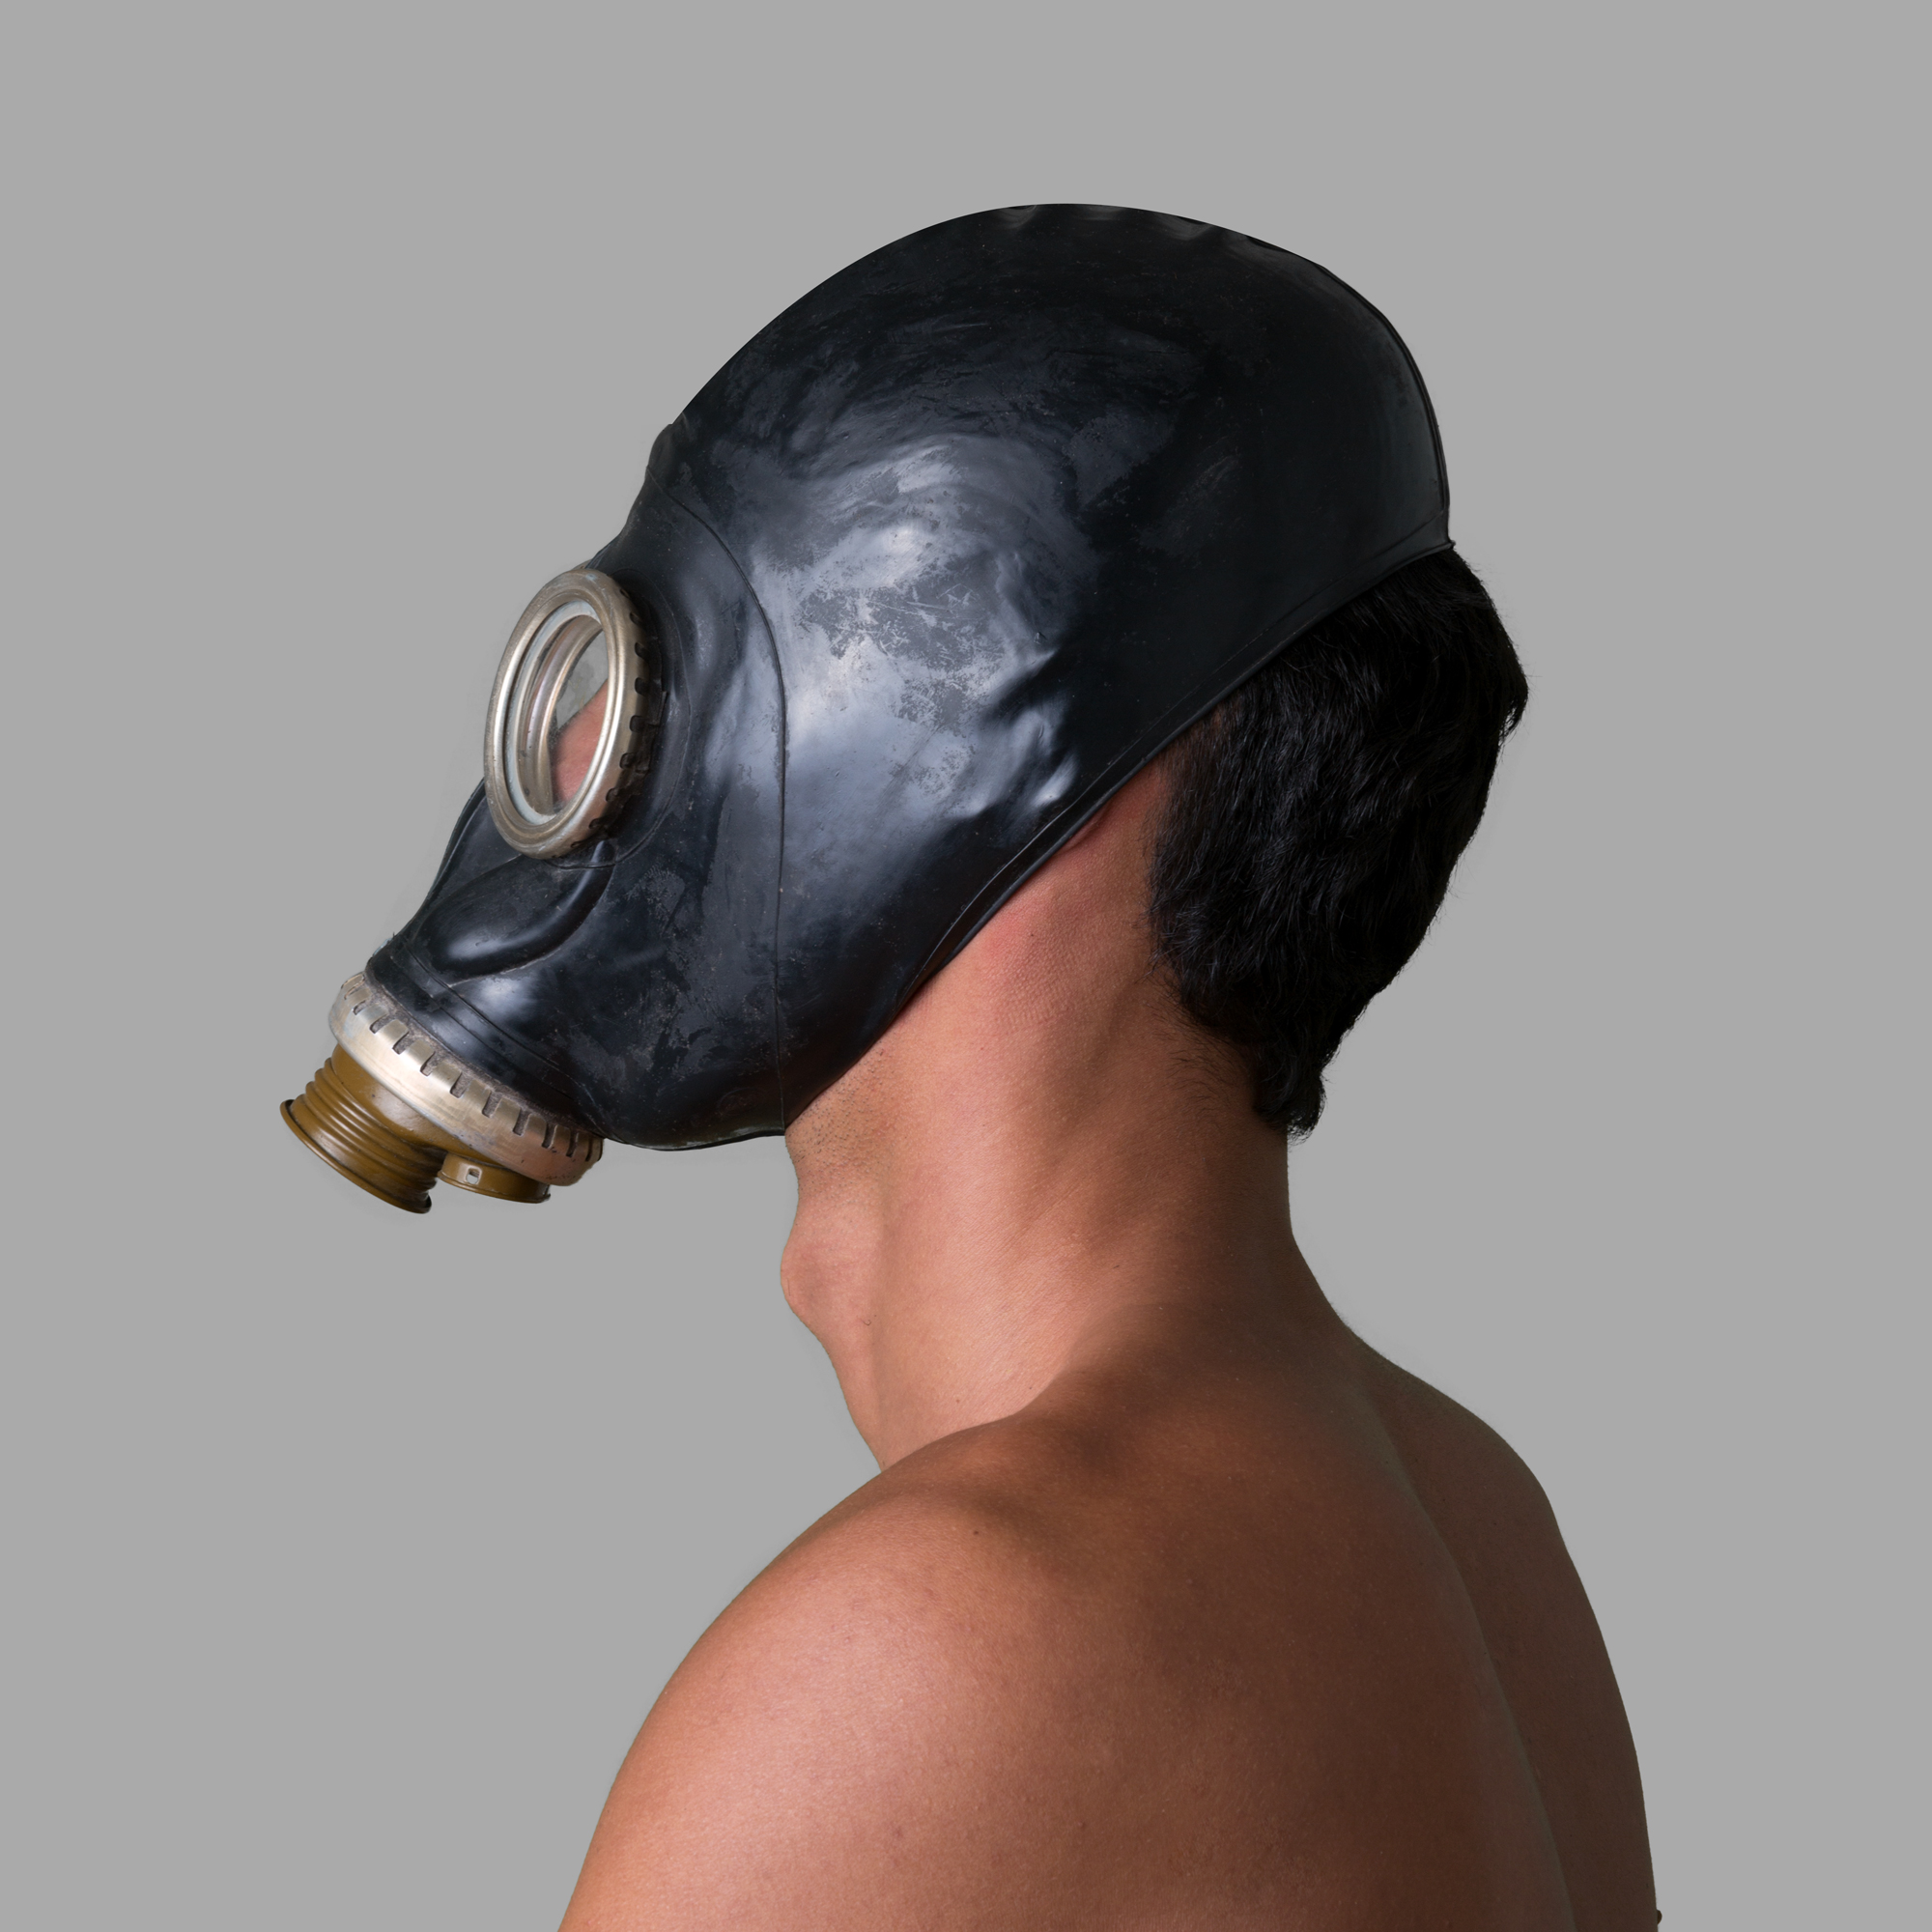 Buy BDSM Gas Mask from MEO BDSM Gas Masks image